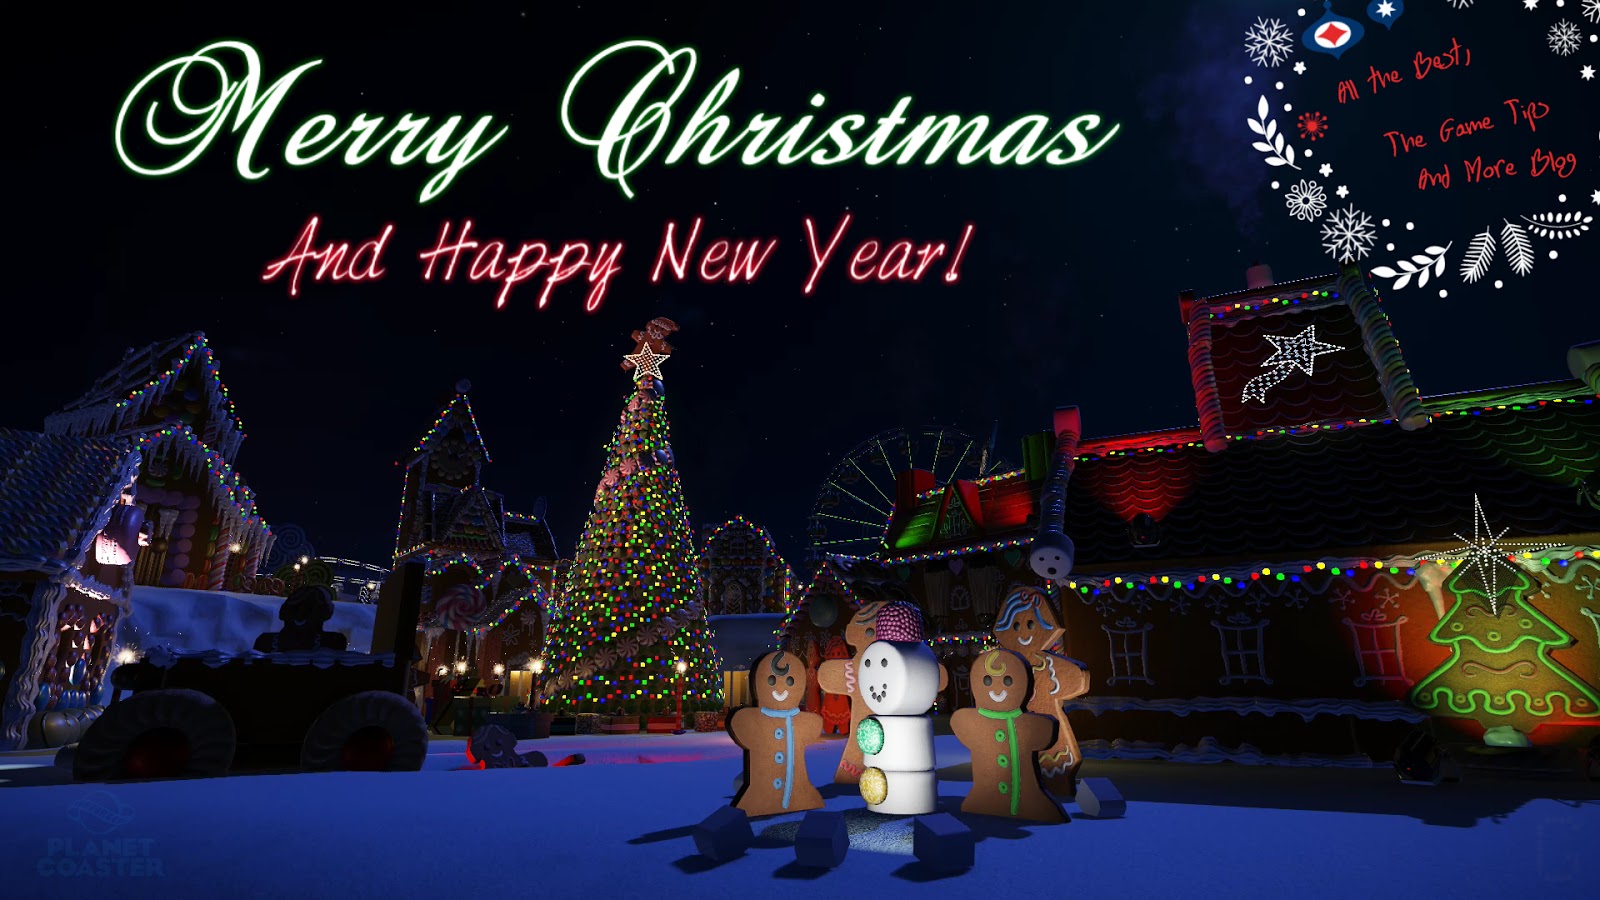 Merry Christmas - And Happy New Year, from The Game Tips And More Blog Wall...